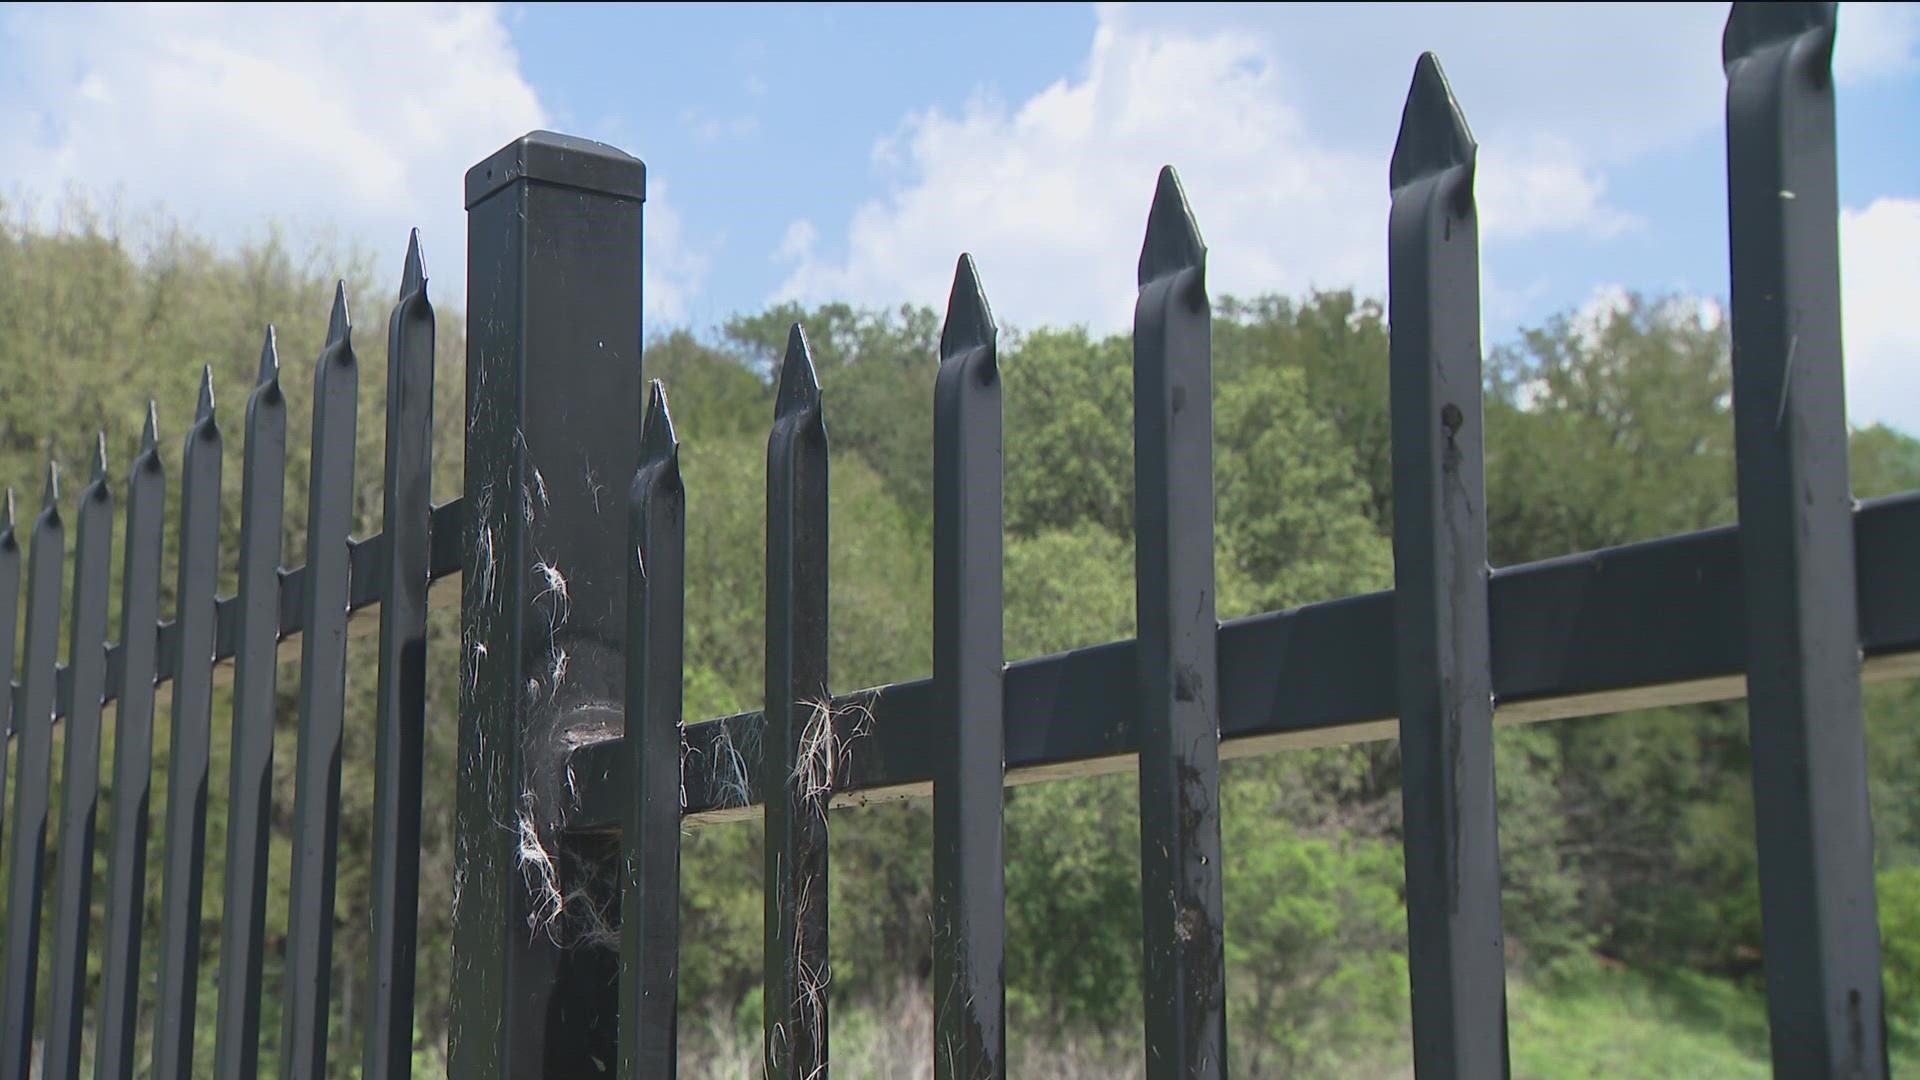 One Austin man's mission comes after discovering a deer impaled on a spiked top fence, but it goes back further for a mother who lost her son in 2018.